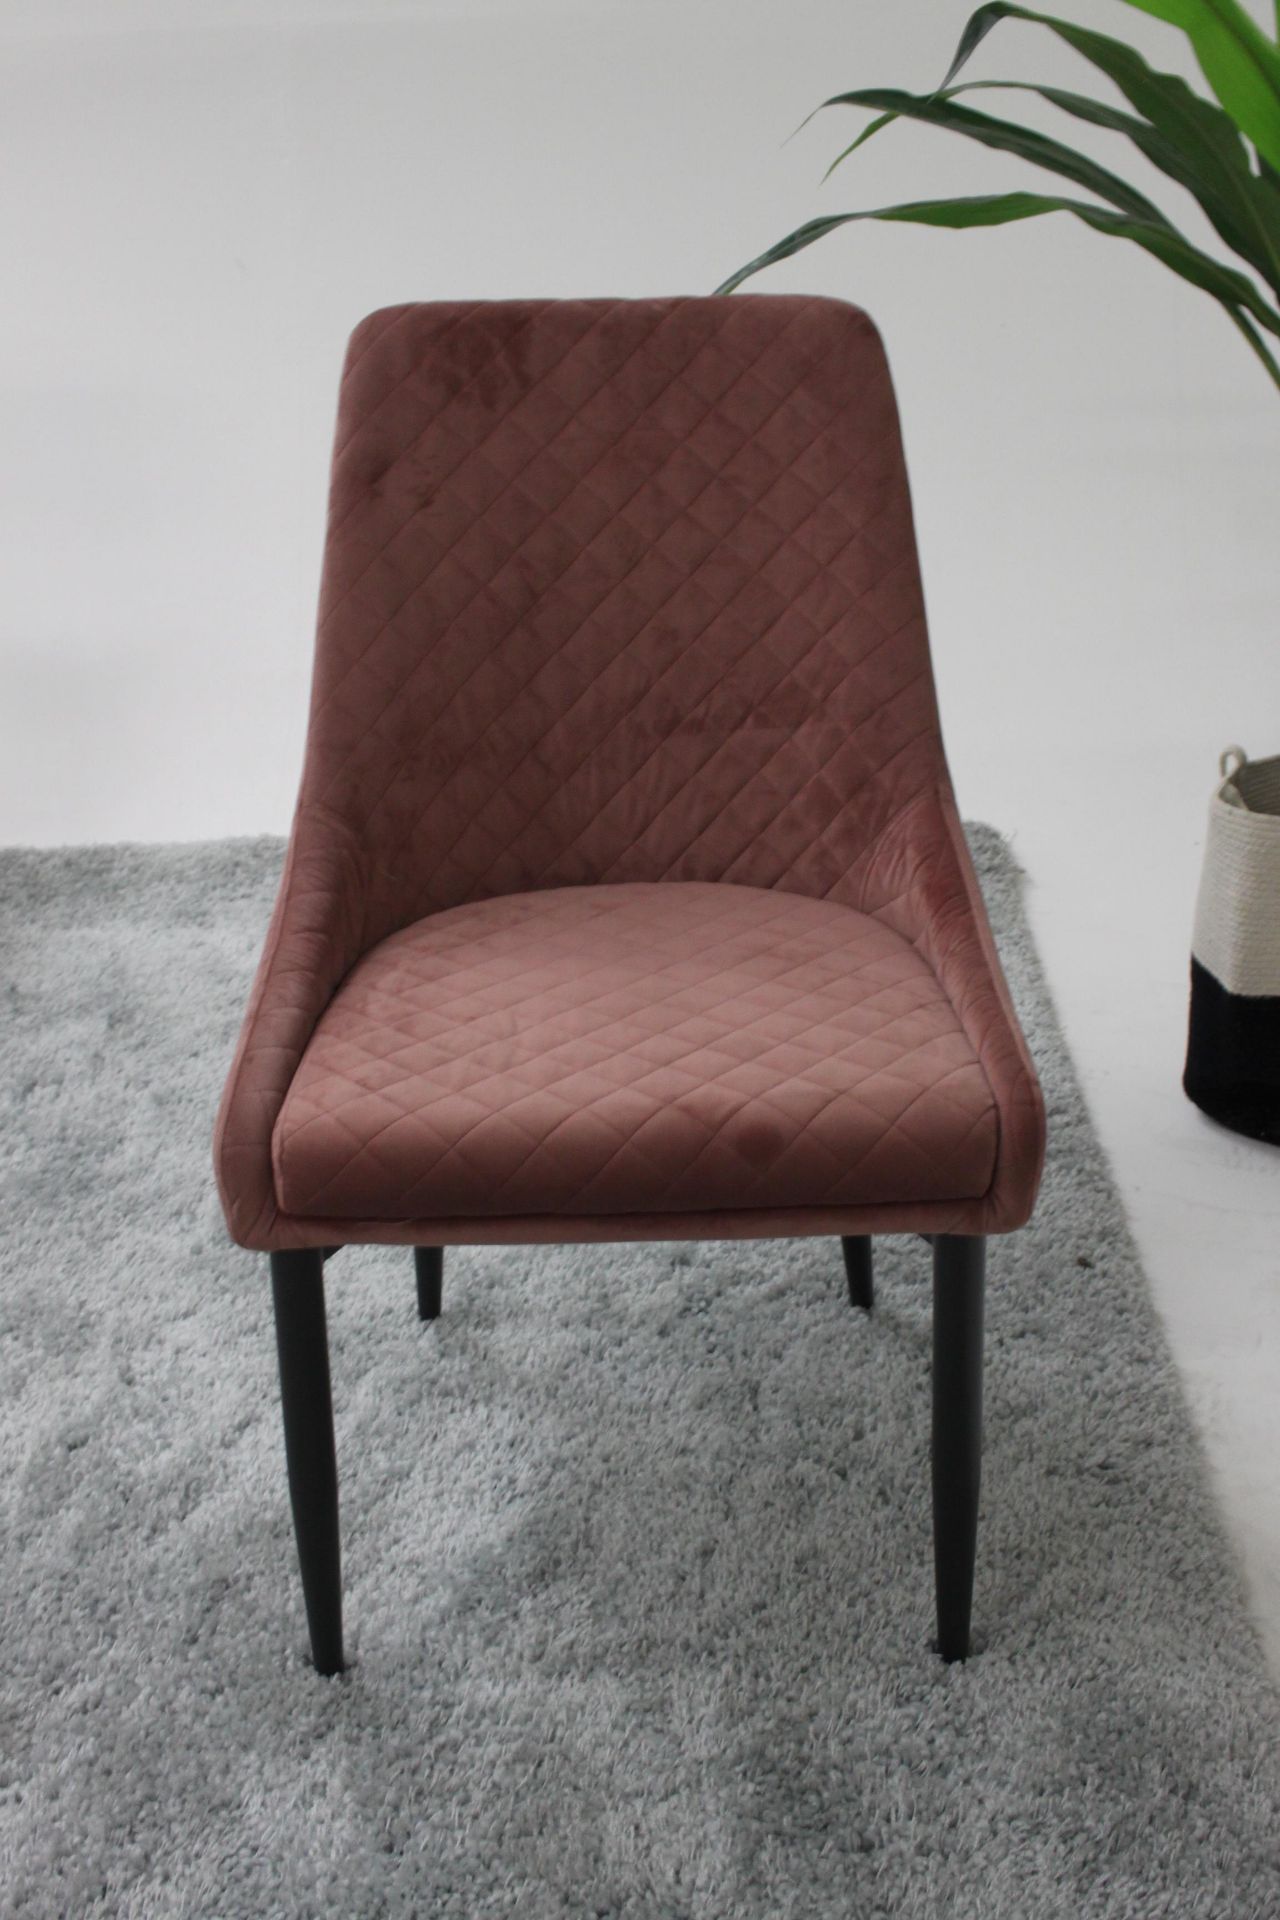 Aston Dining Chair Pink Quilted Dining Chair Is A Perfect Combination Of Functionality Durability - Image 3 of 3